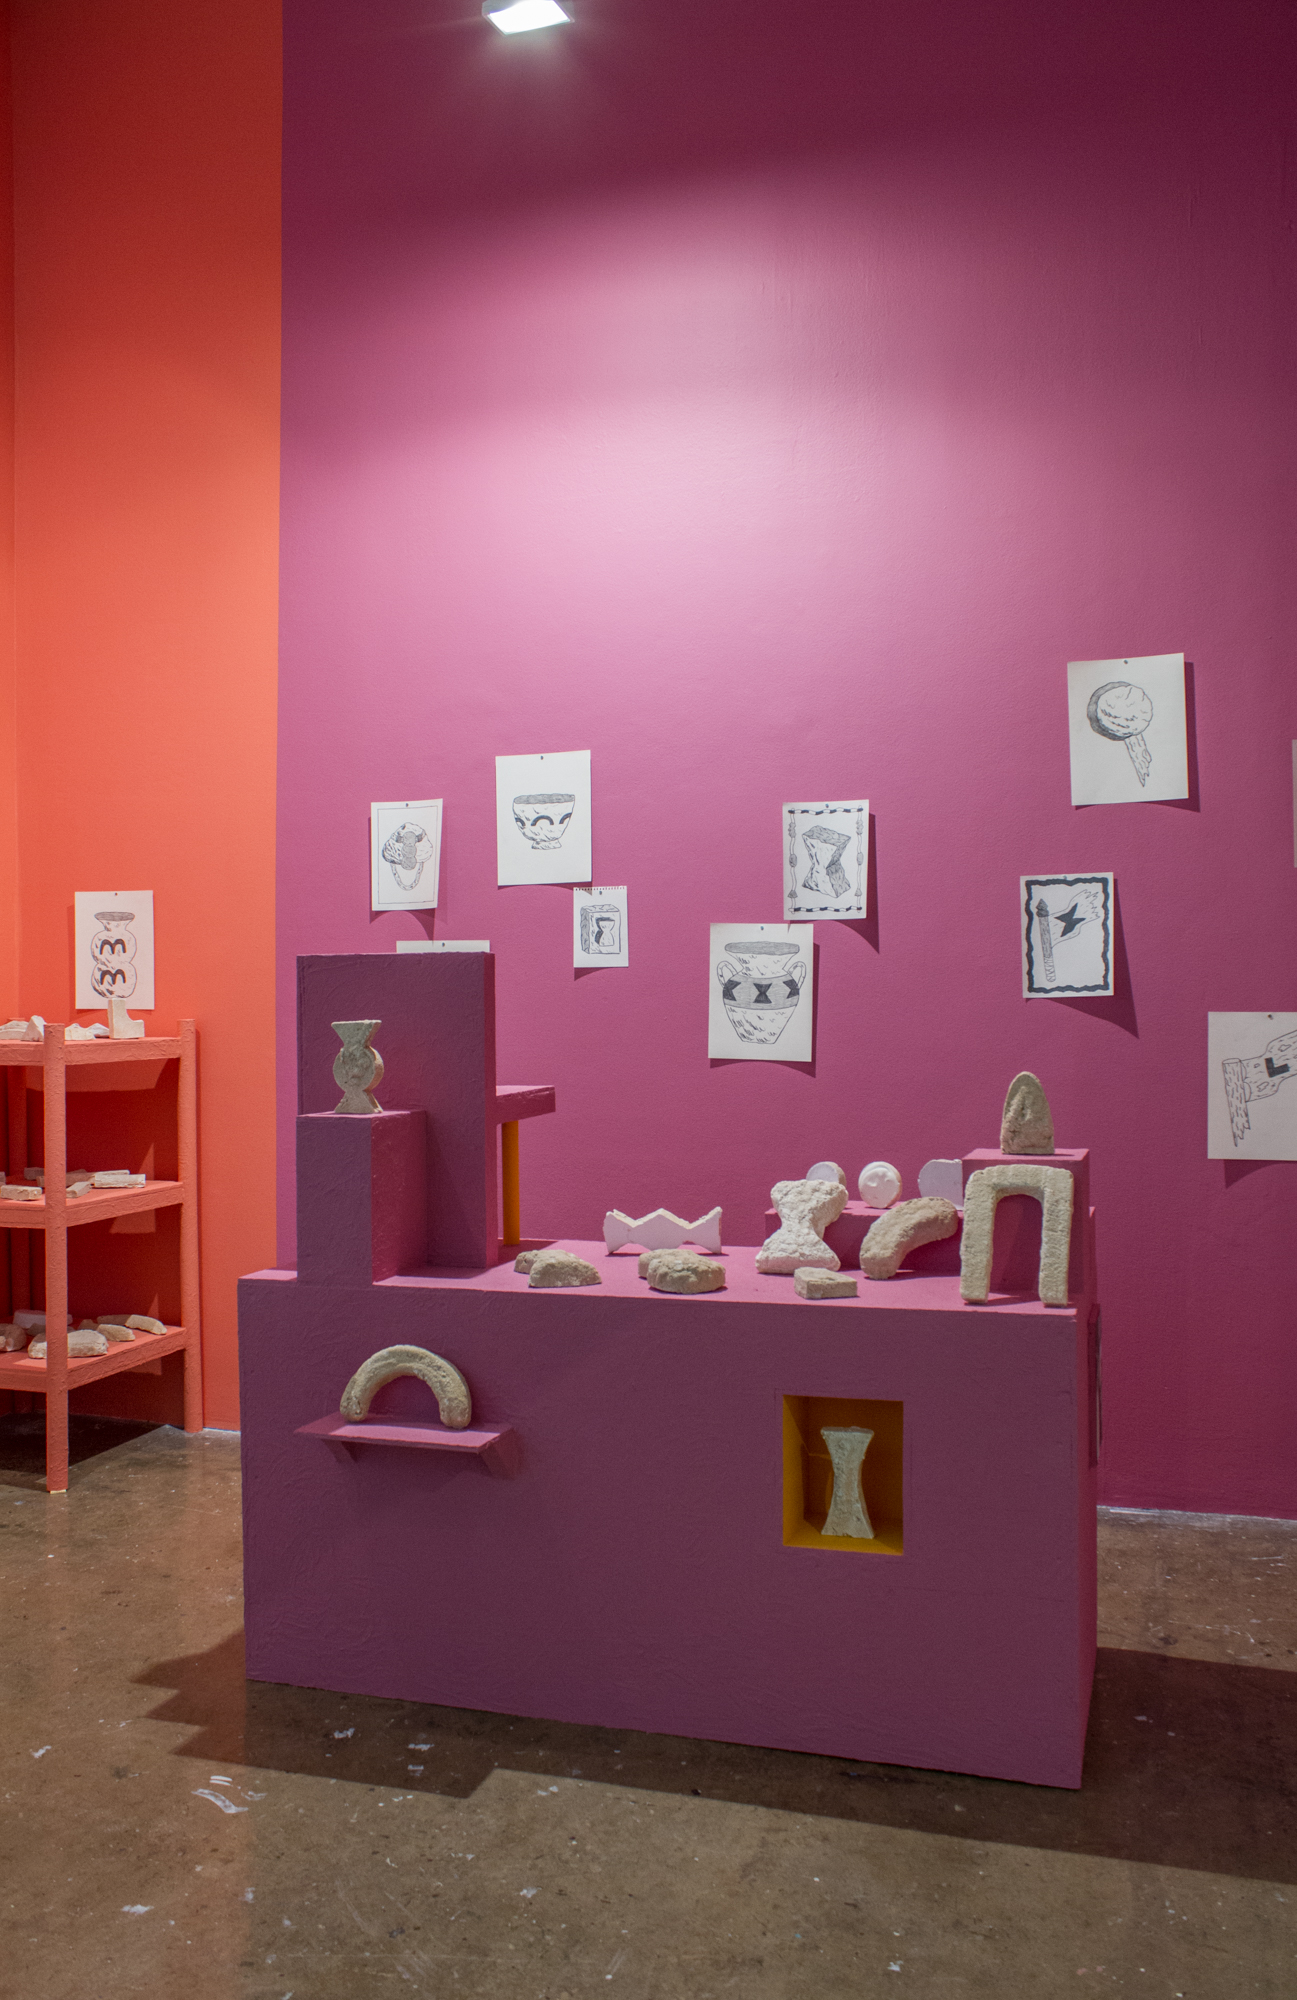 Installation view. Rand Renfrow, More Findings, 2020.